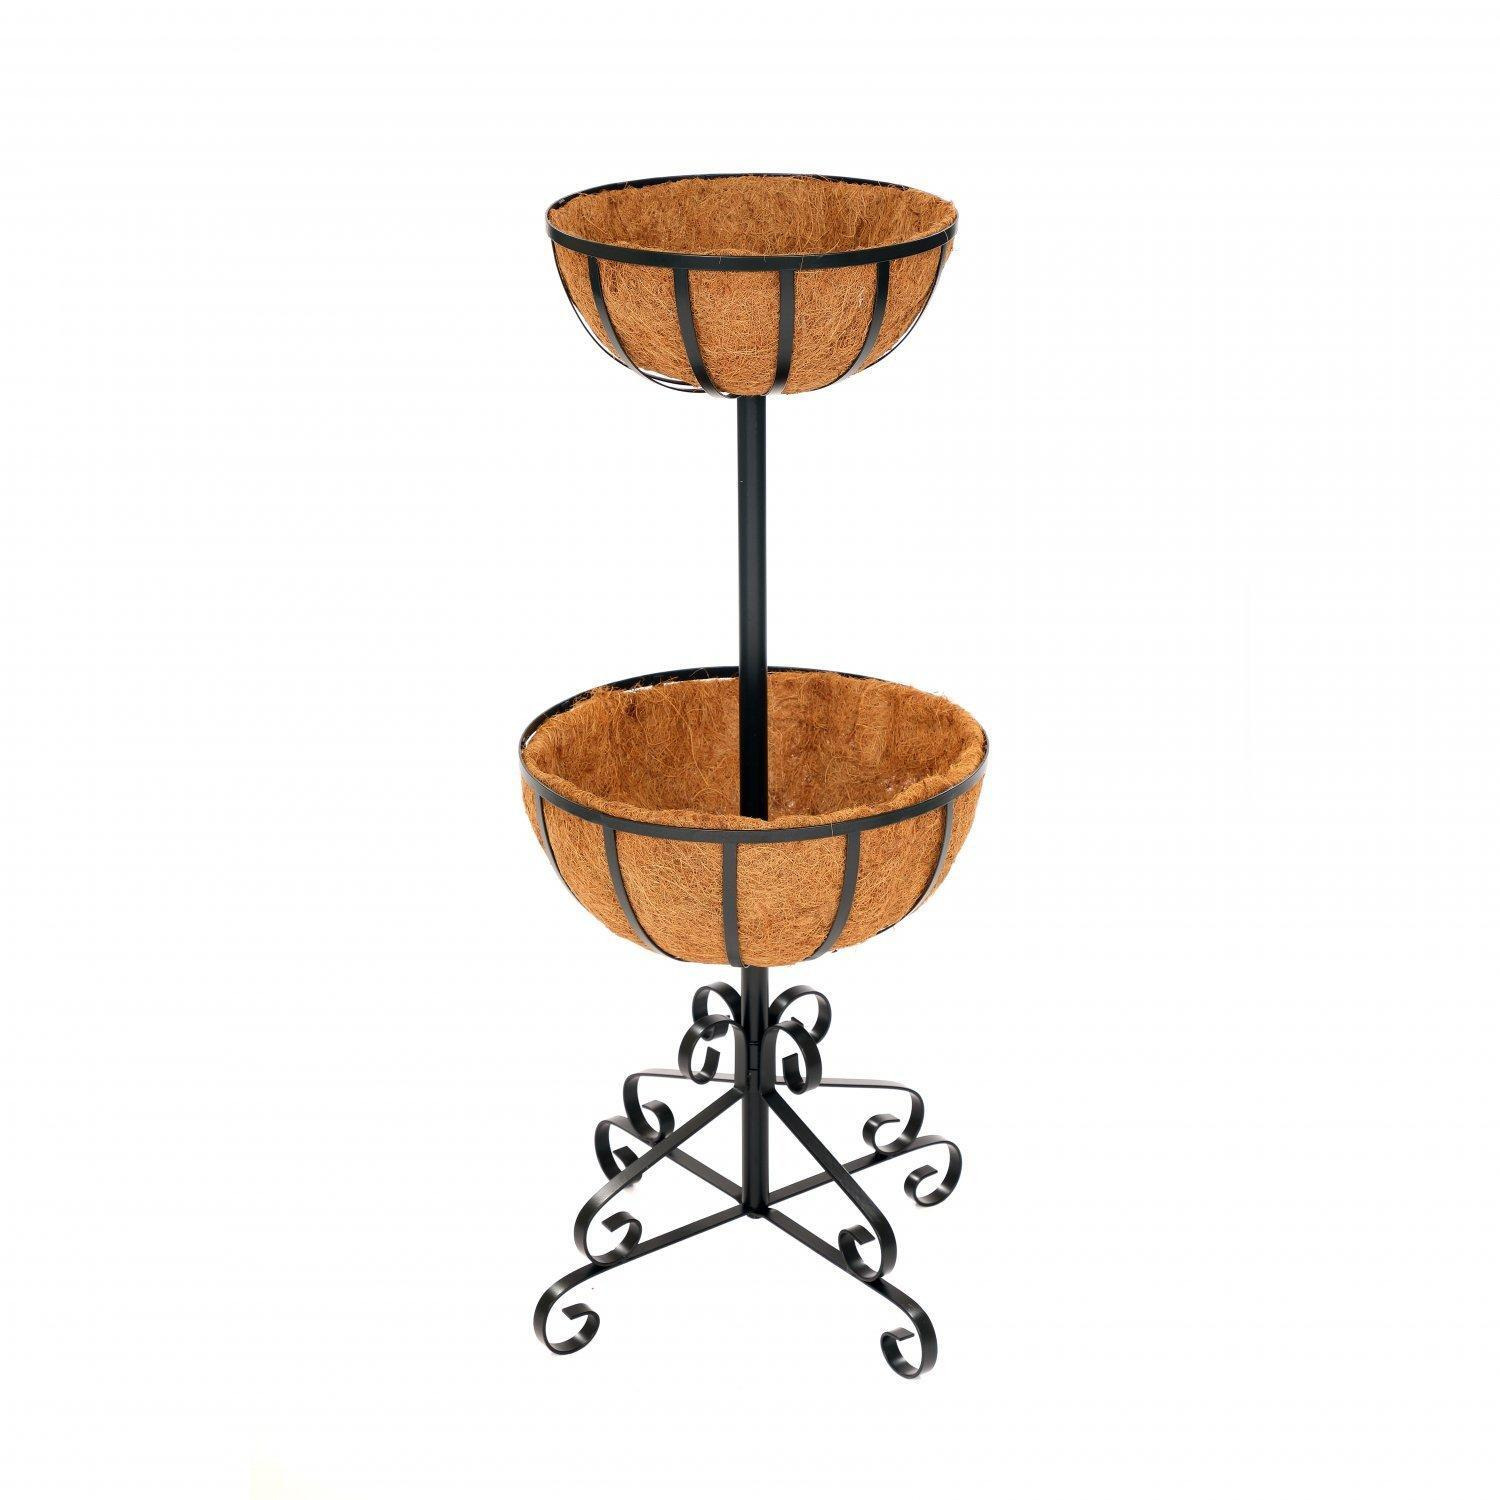 2 Tier Metal Flower Fountain Plant Display Stand with Coco Liners - image 1